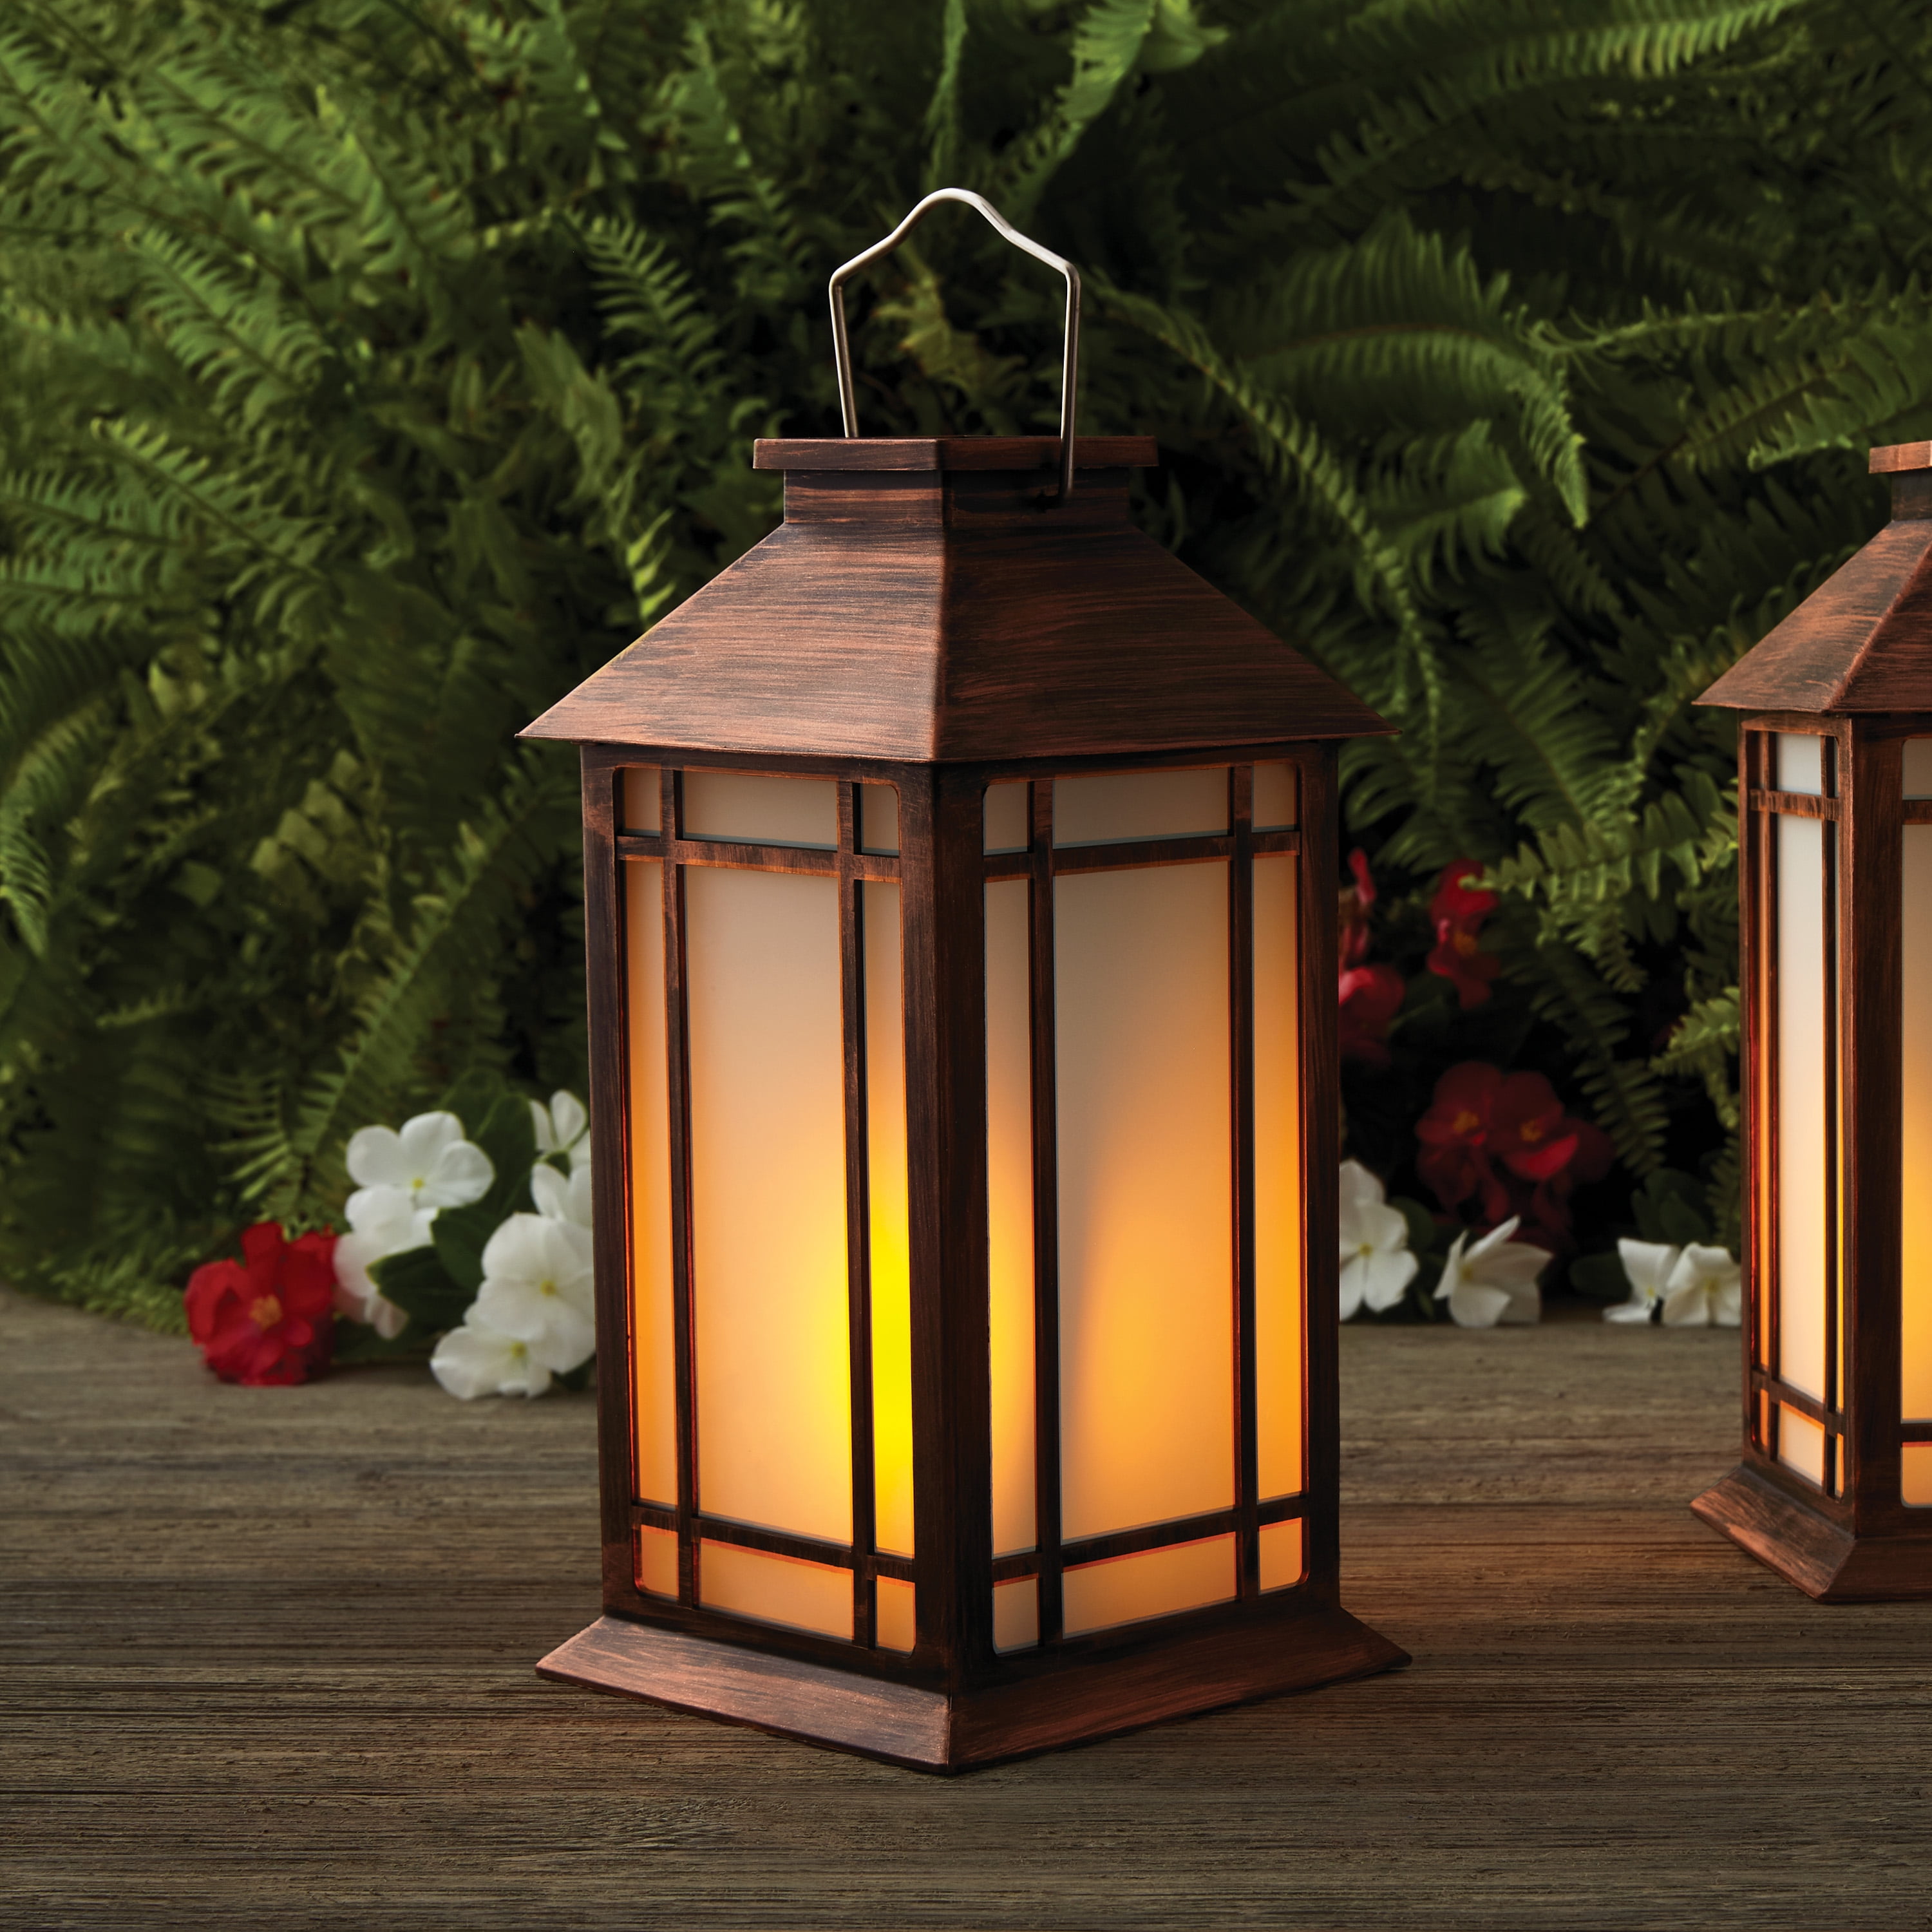 13 Best Rechargeable Lanterns In 2023, Interior Designer-Approved